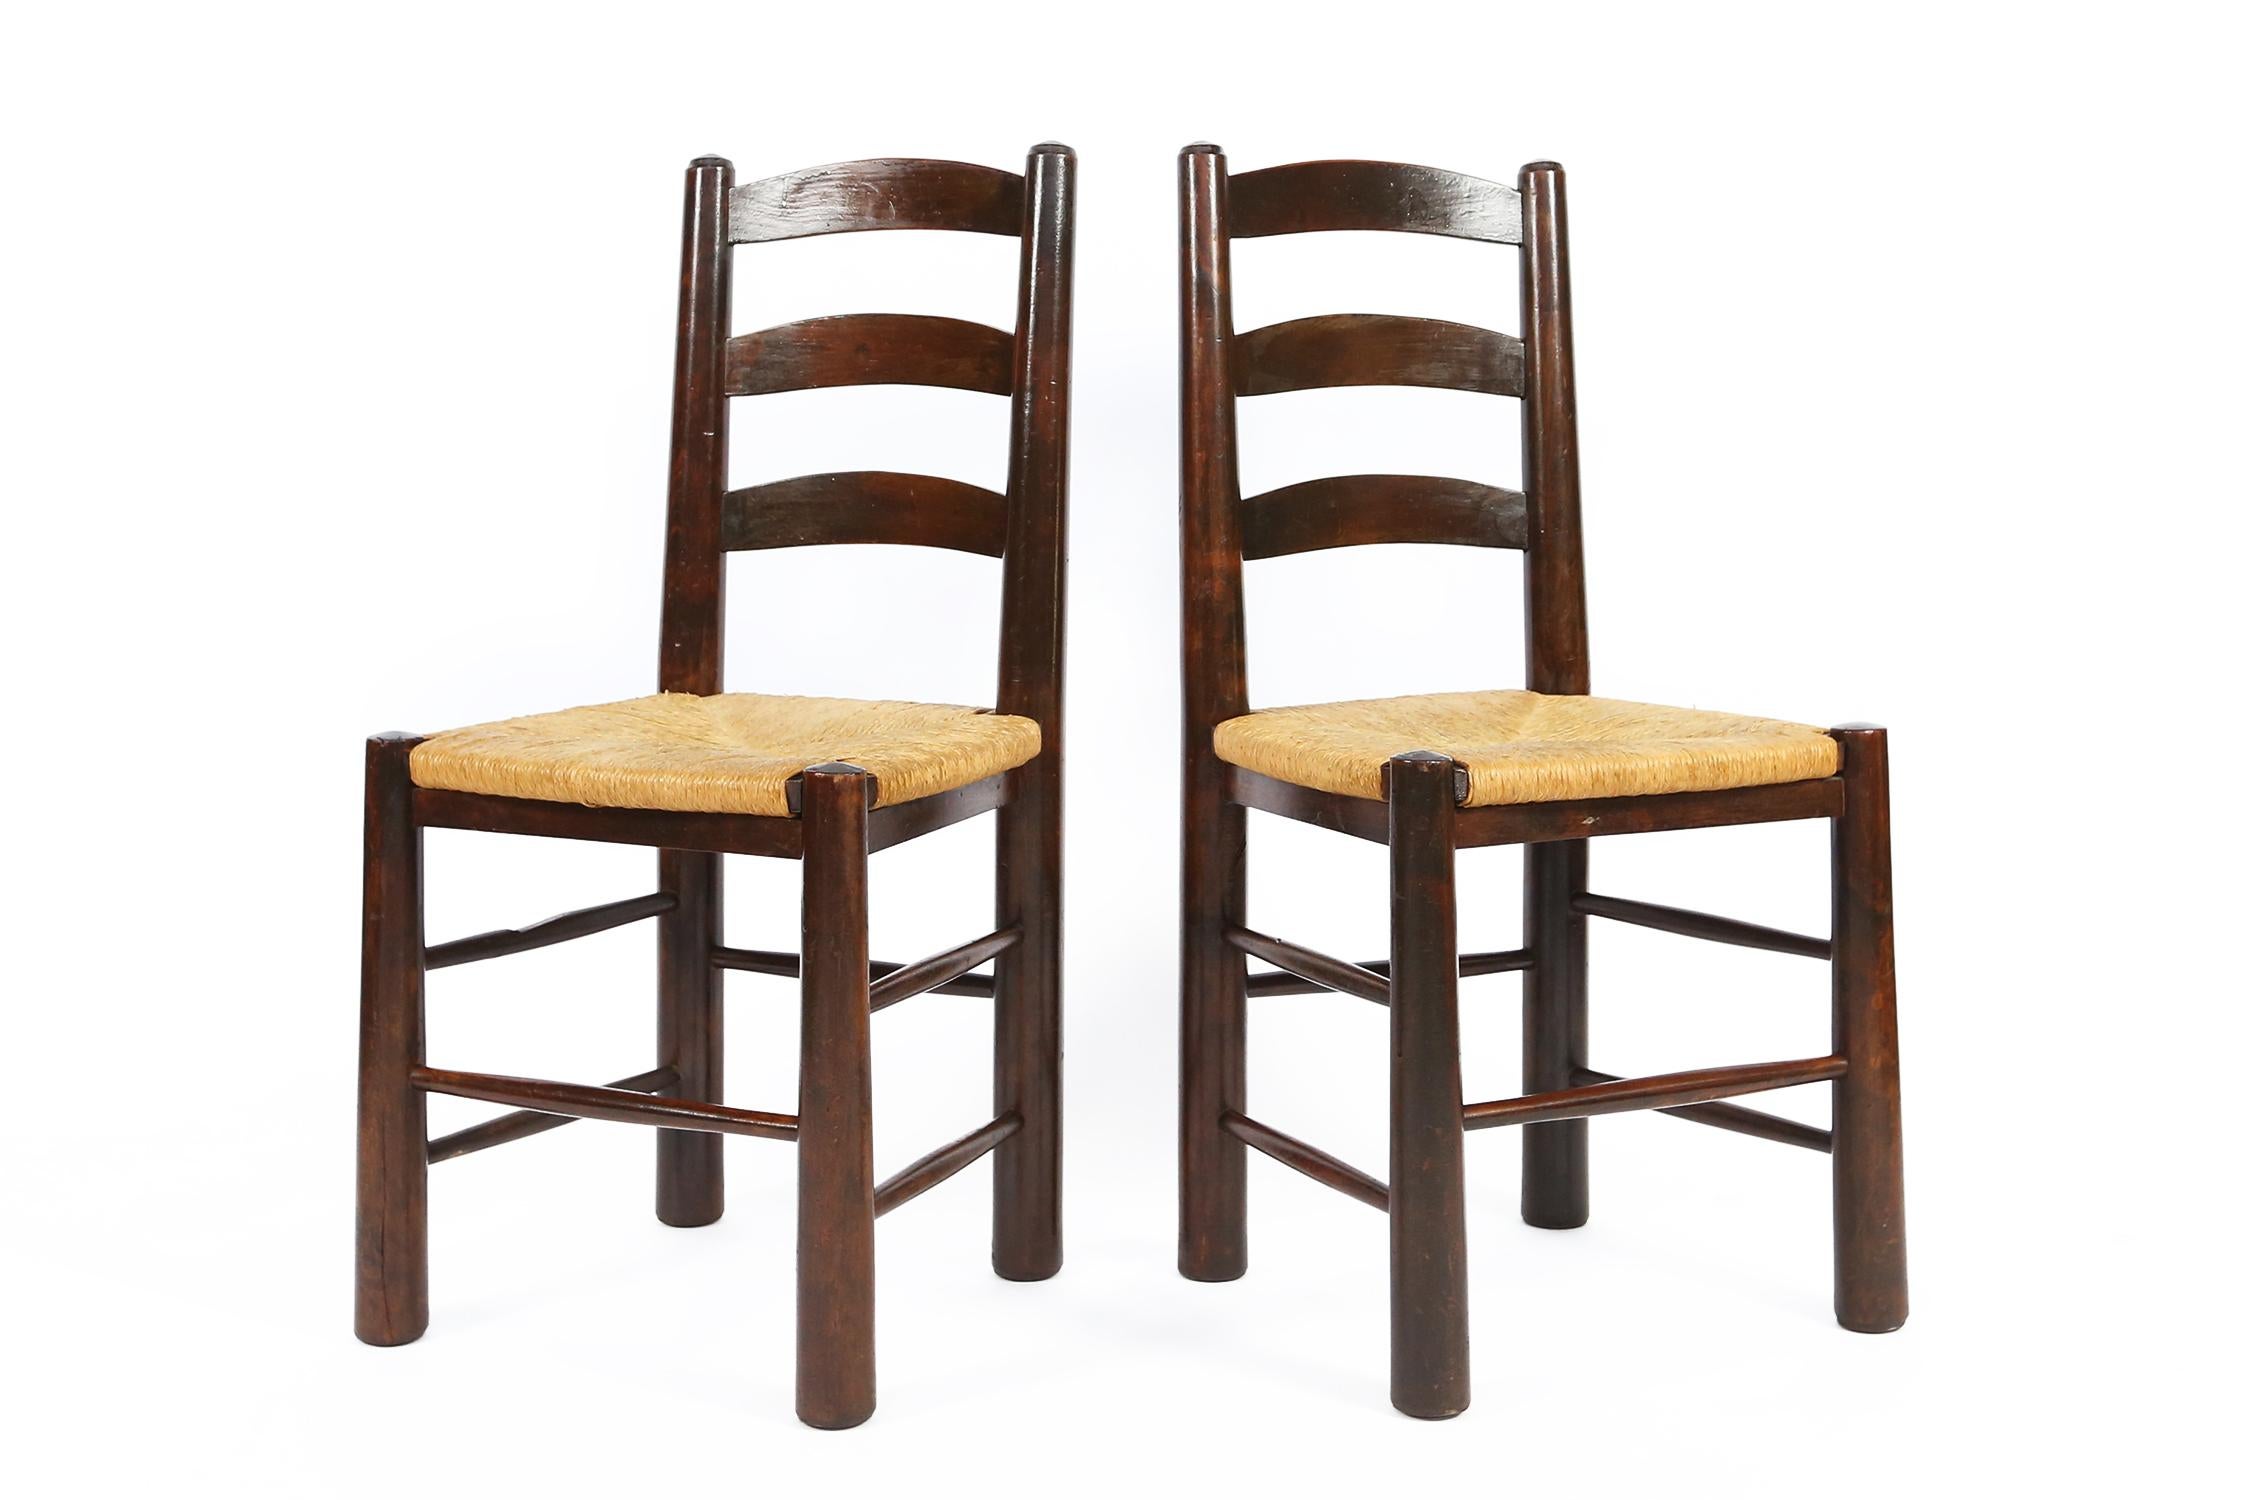 Mid-20th Century Set of 6 French Chairs by G. Robert in the Style of Dudouyt or Perriand